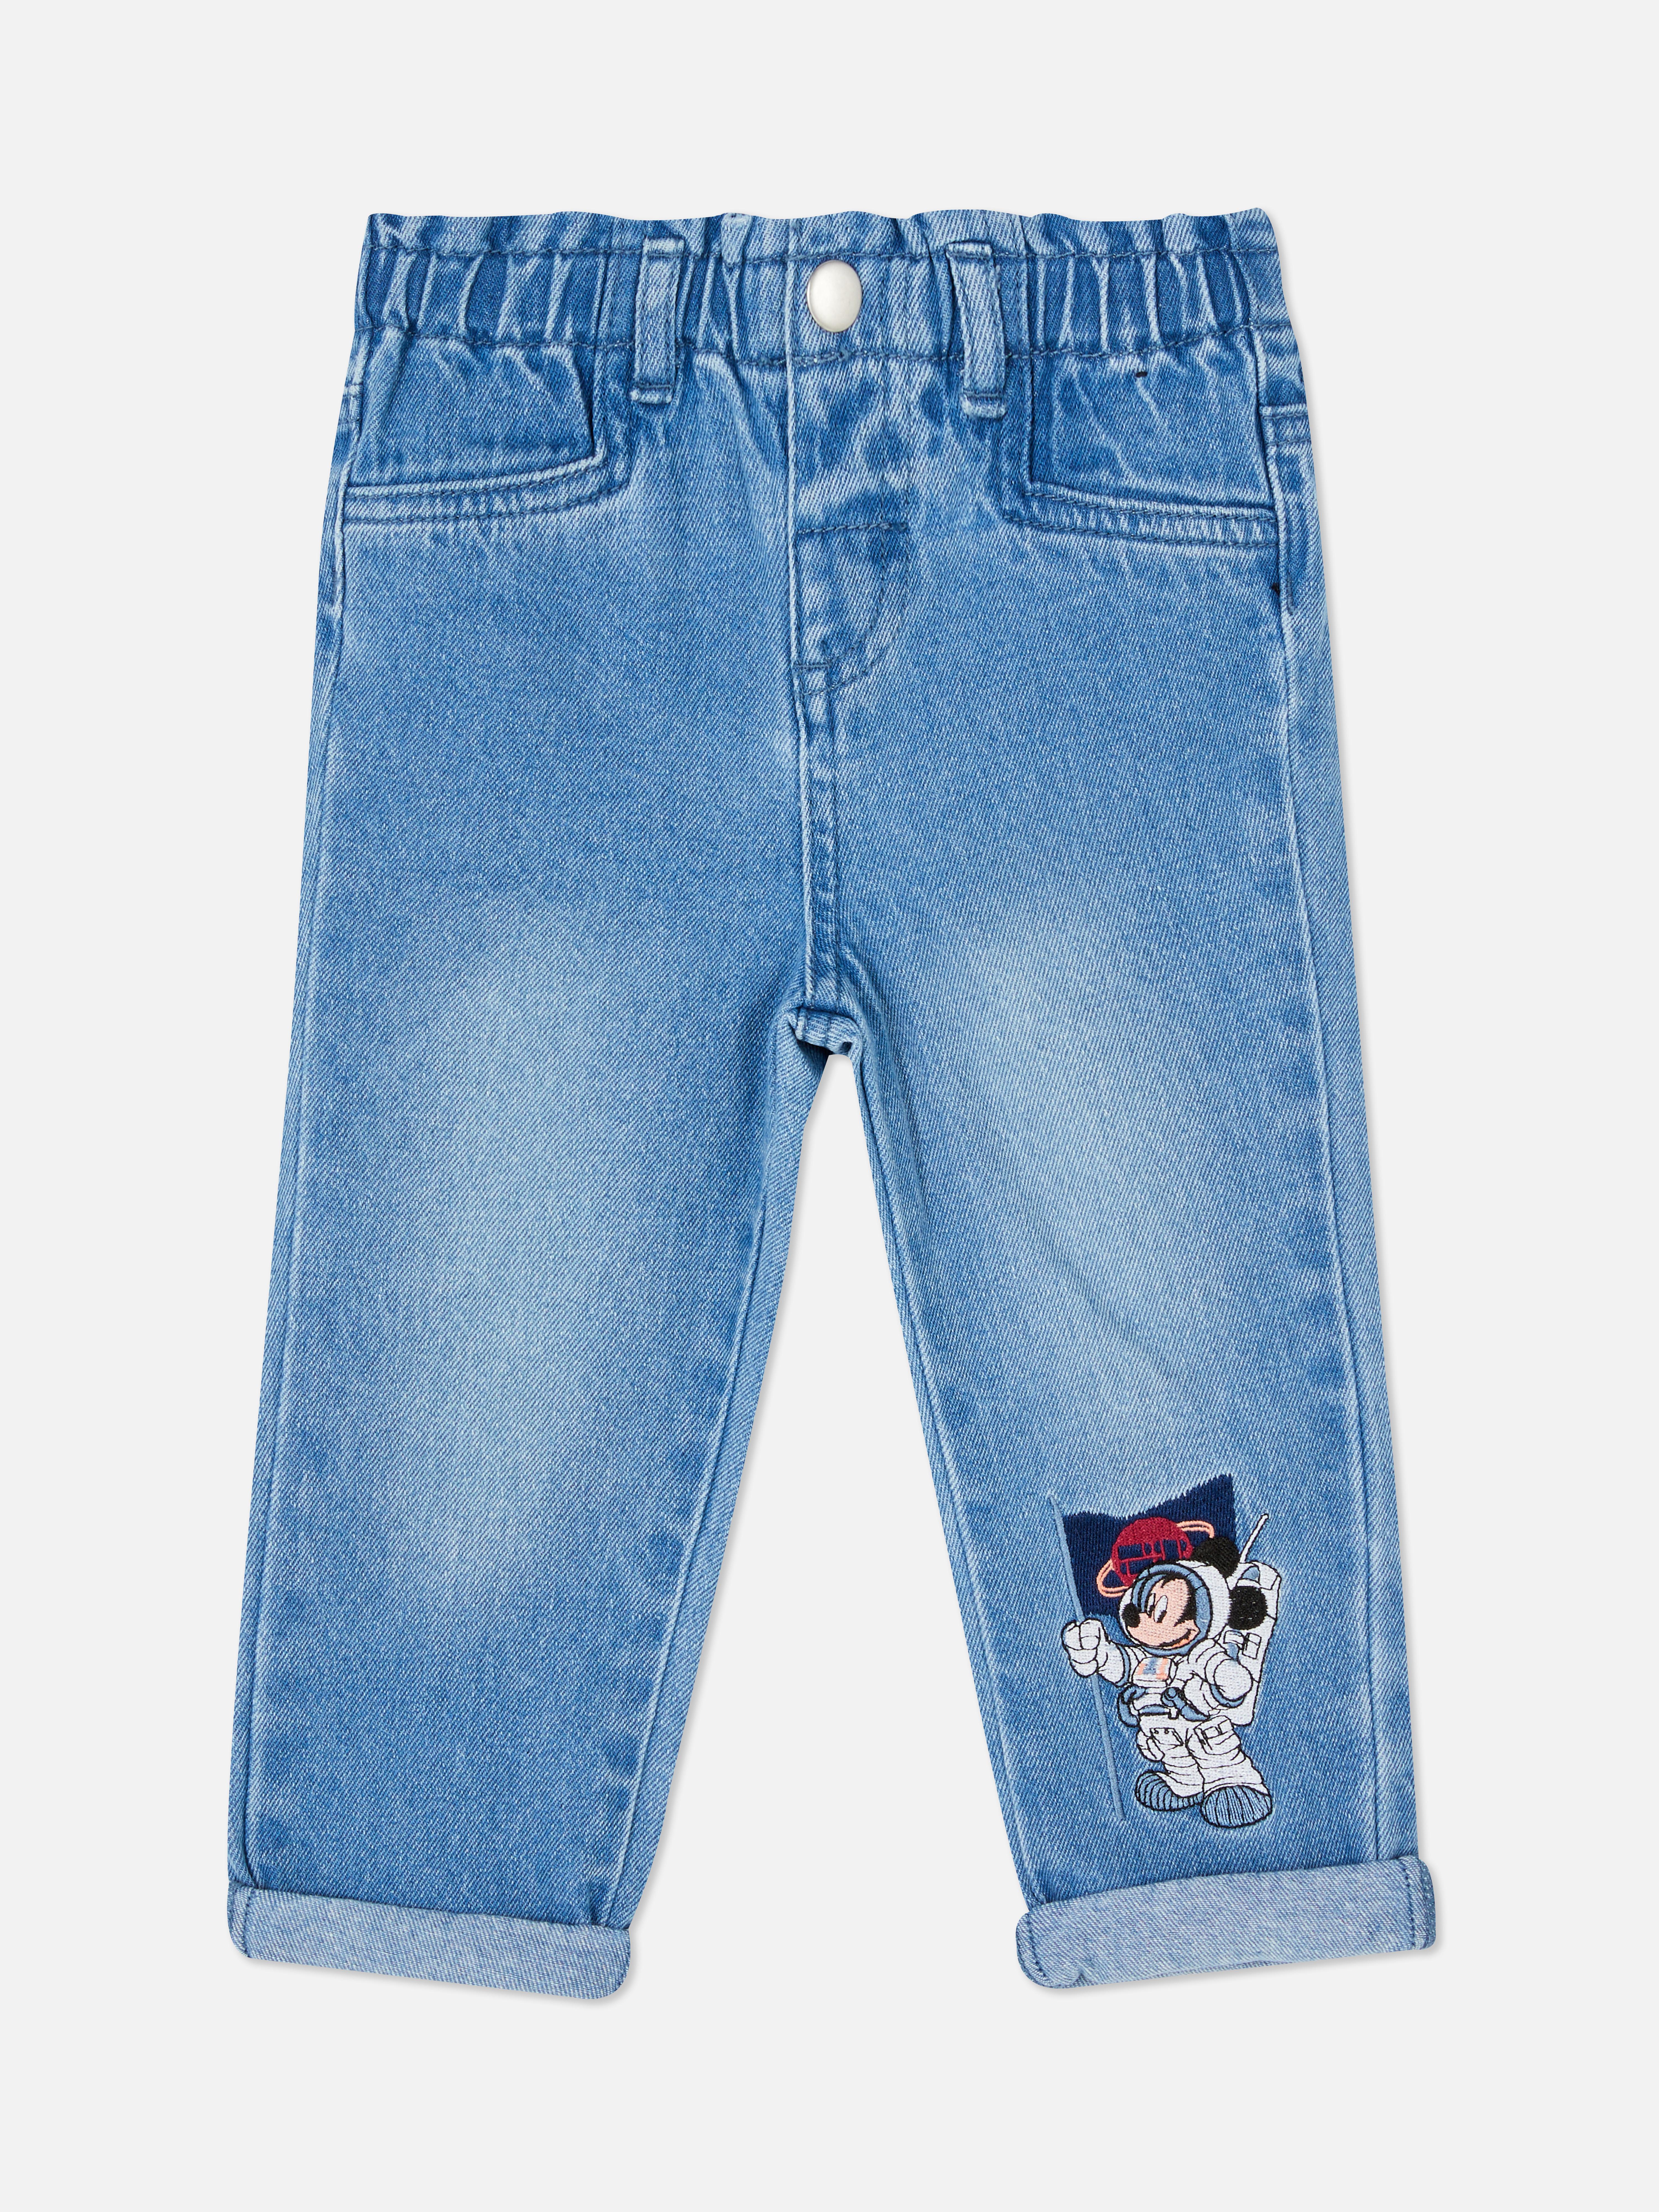 Disney’s Mickey Mouse Embroidered Jeans